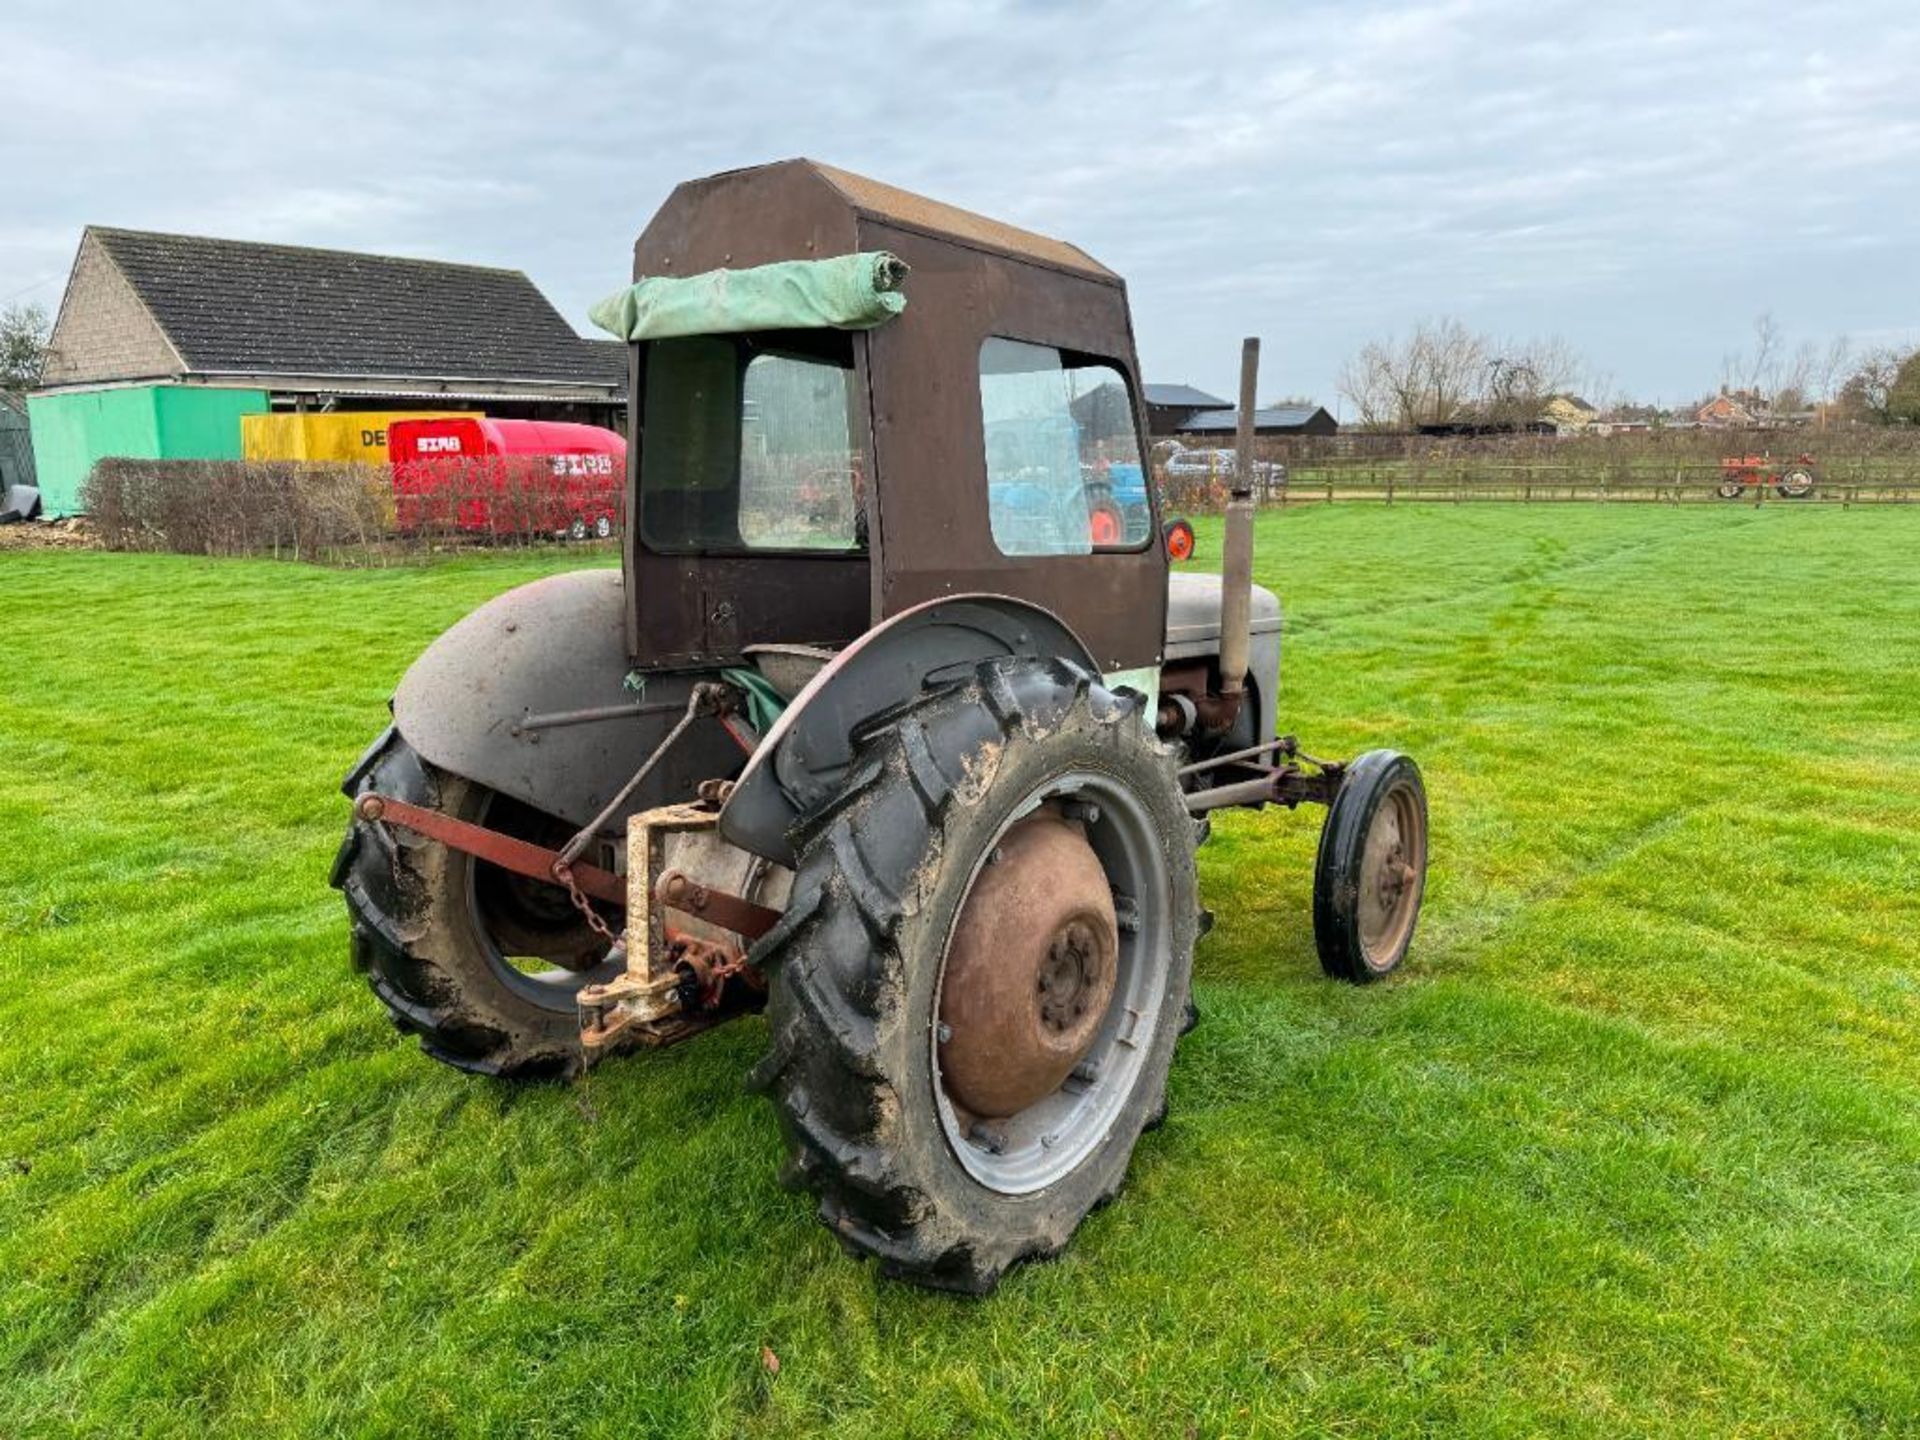 1954 Ferguson TEF 2wd diesel tractor with Clydebuilt cab, rear drawbar assembly and linkage on 11.2/ - Image 8 of 16